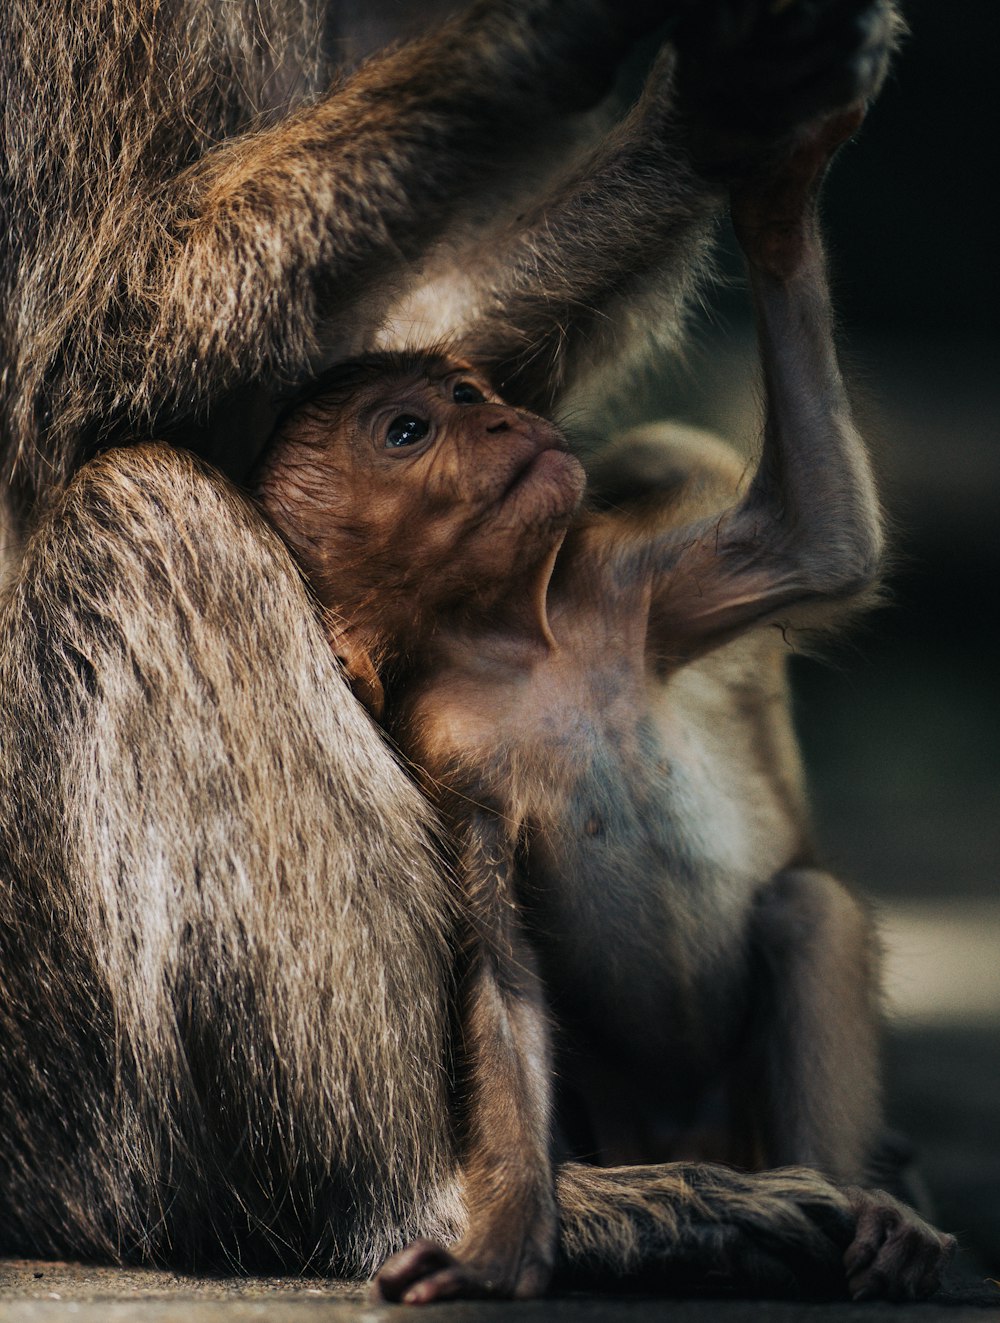 a baby monkey is playing with its mother